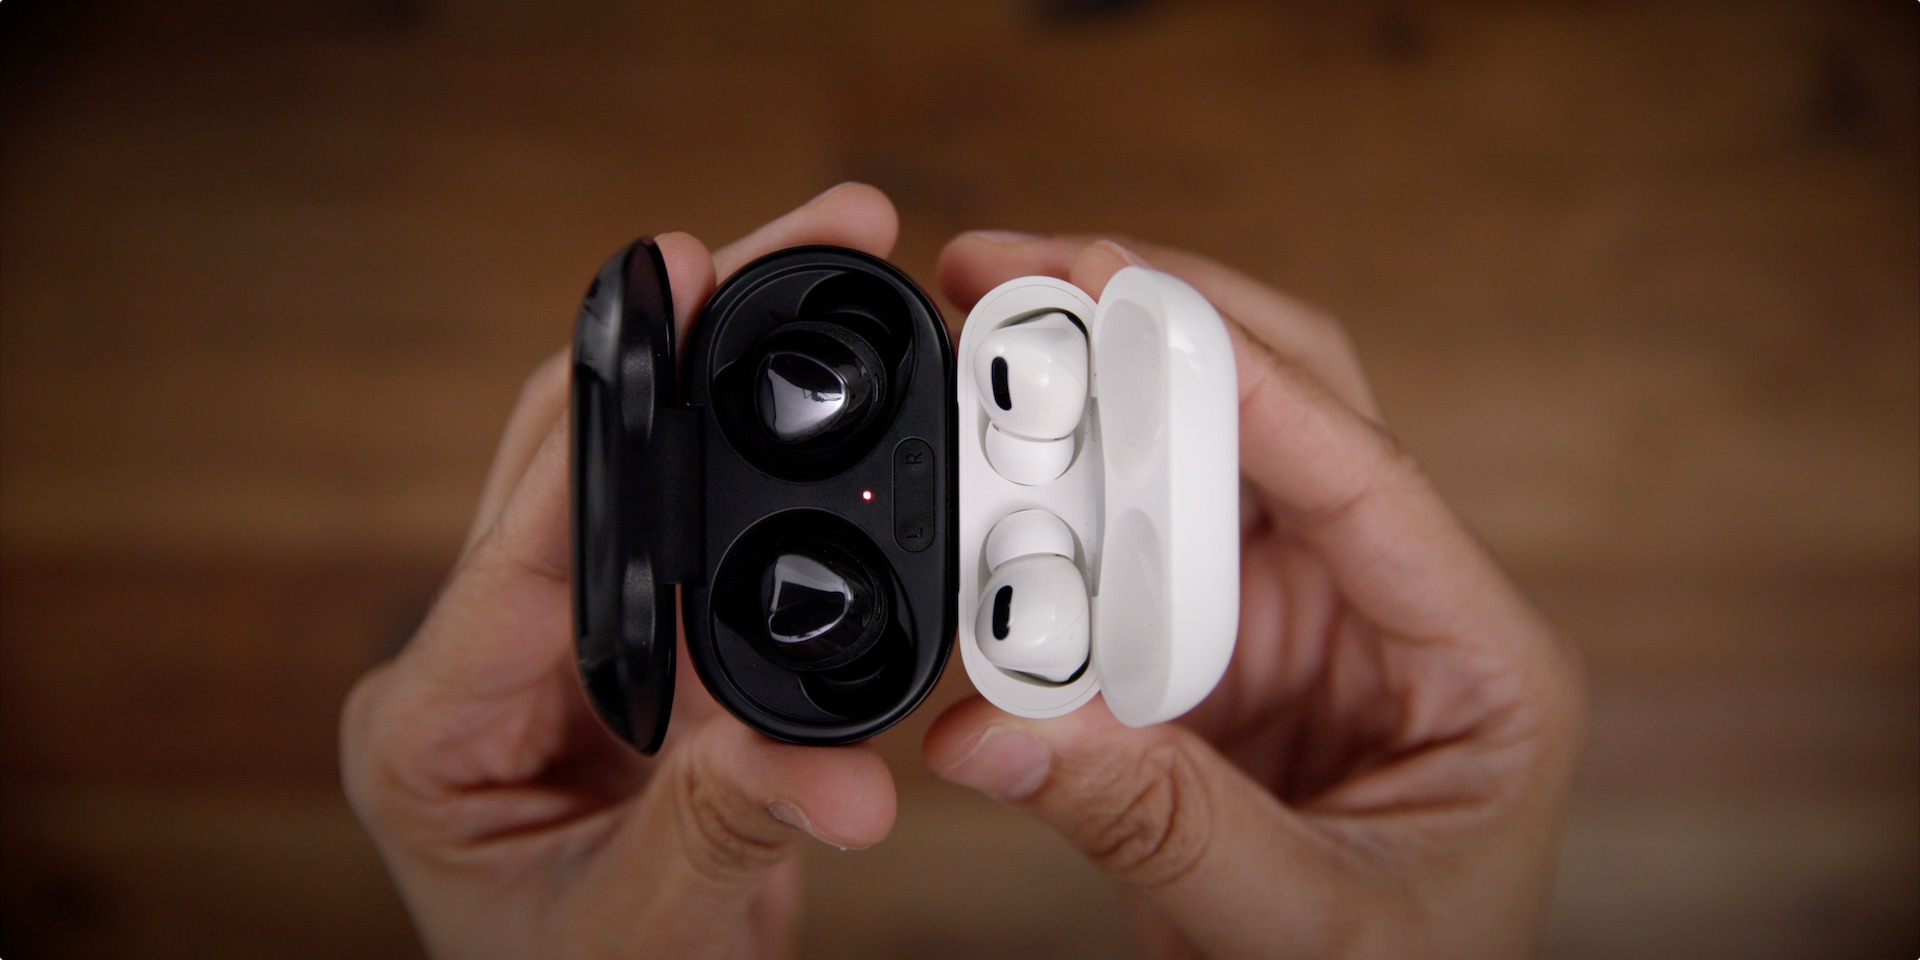 Shackle Lima rumor Samsung Galaxy Buds+ impressions from an AirPods Pro user [Video] - 9to5Mac